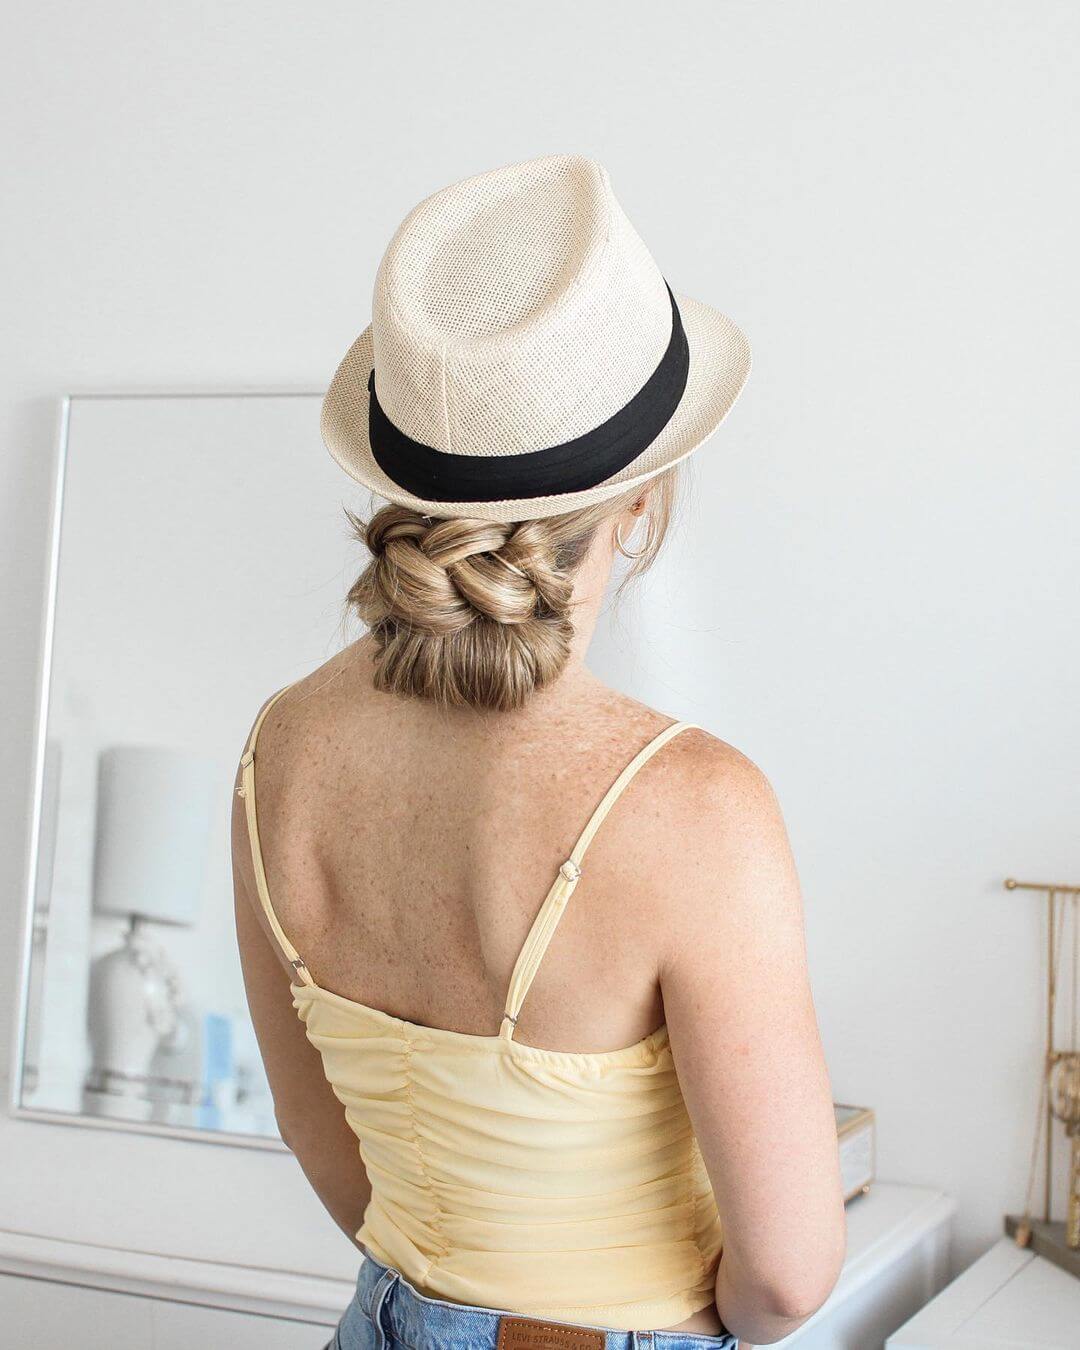 Low bun is a trend now!